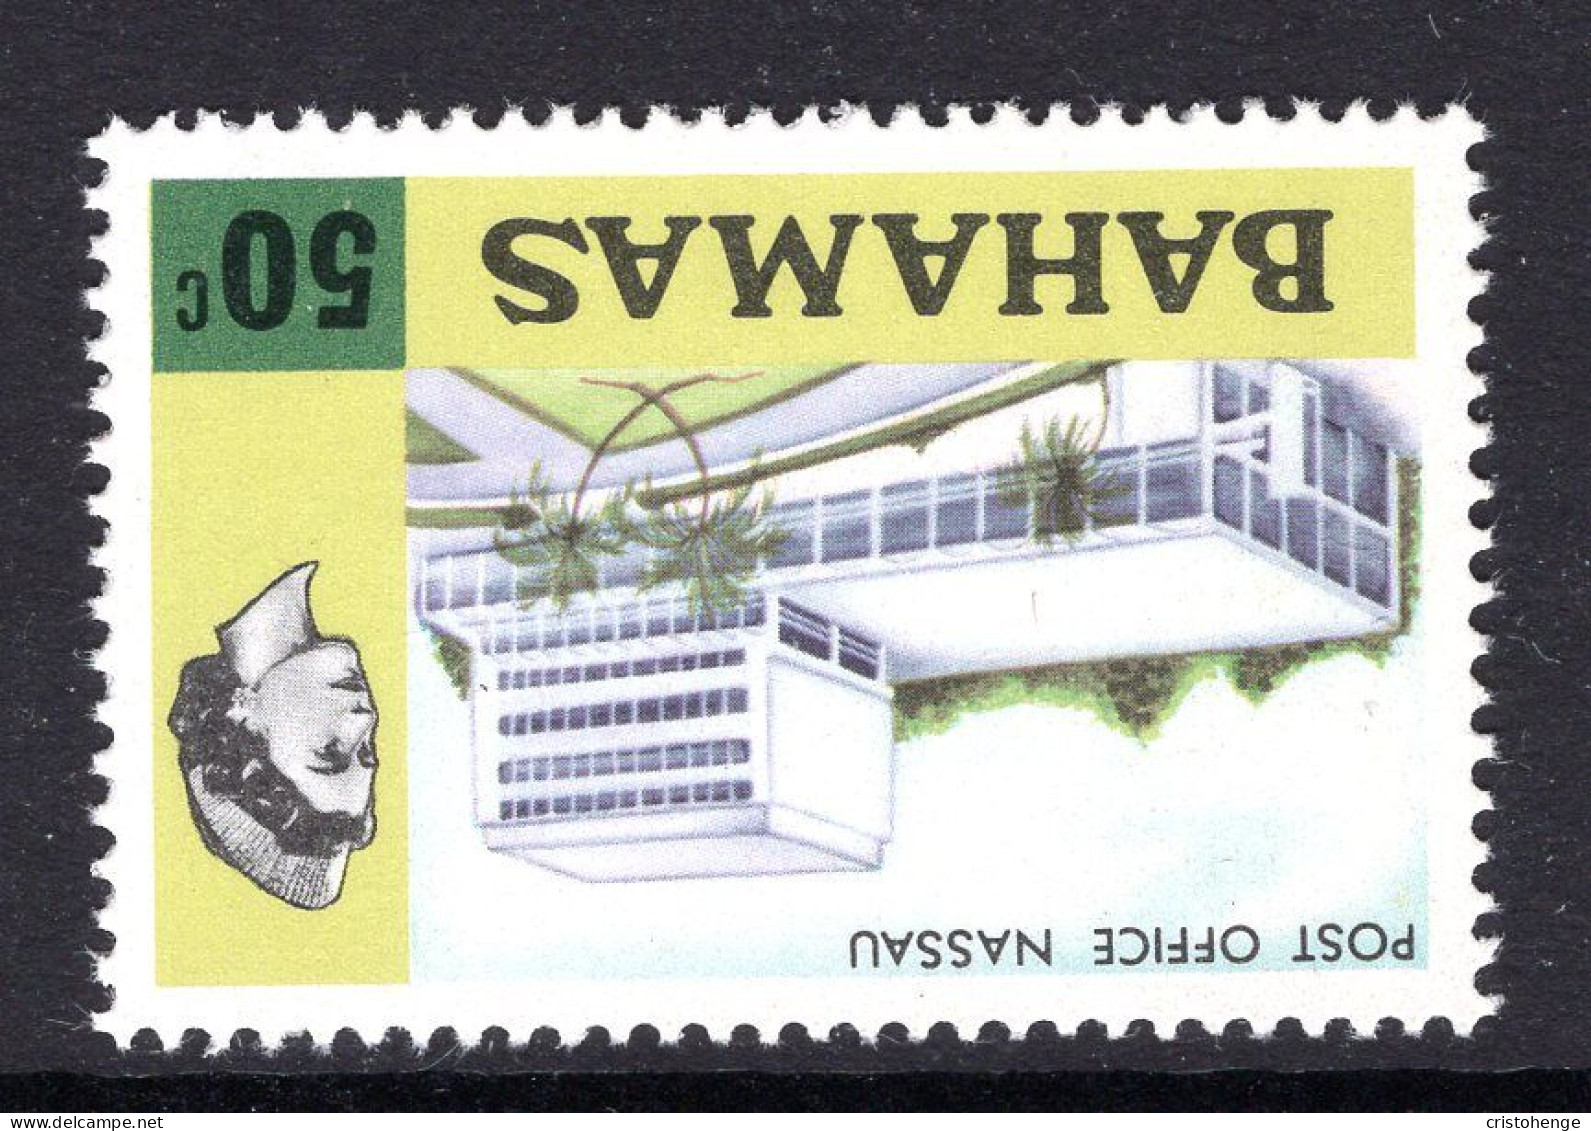 Bahamas 1972-73 Pictorials - 50c Post Office- Wmk. Crown To Left Of CA - MNH (SG 397w) - 1963-1973 Ministerial Government